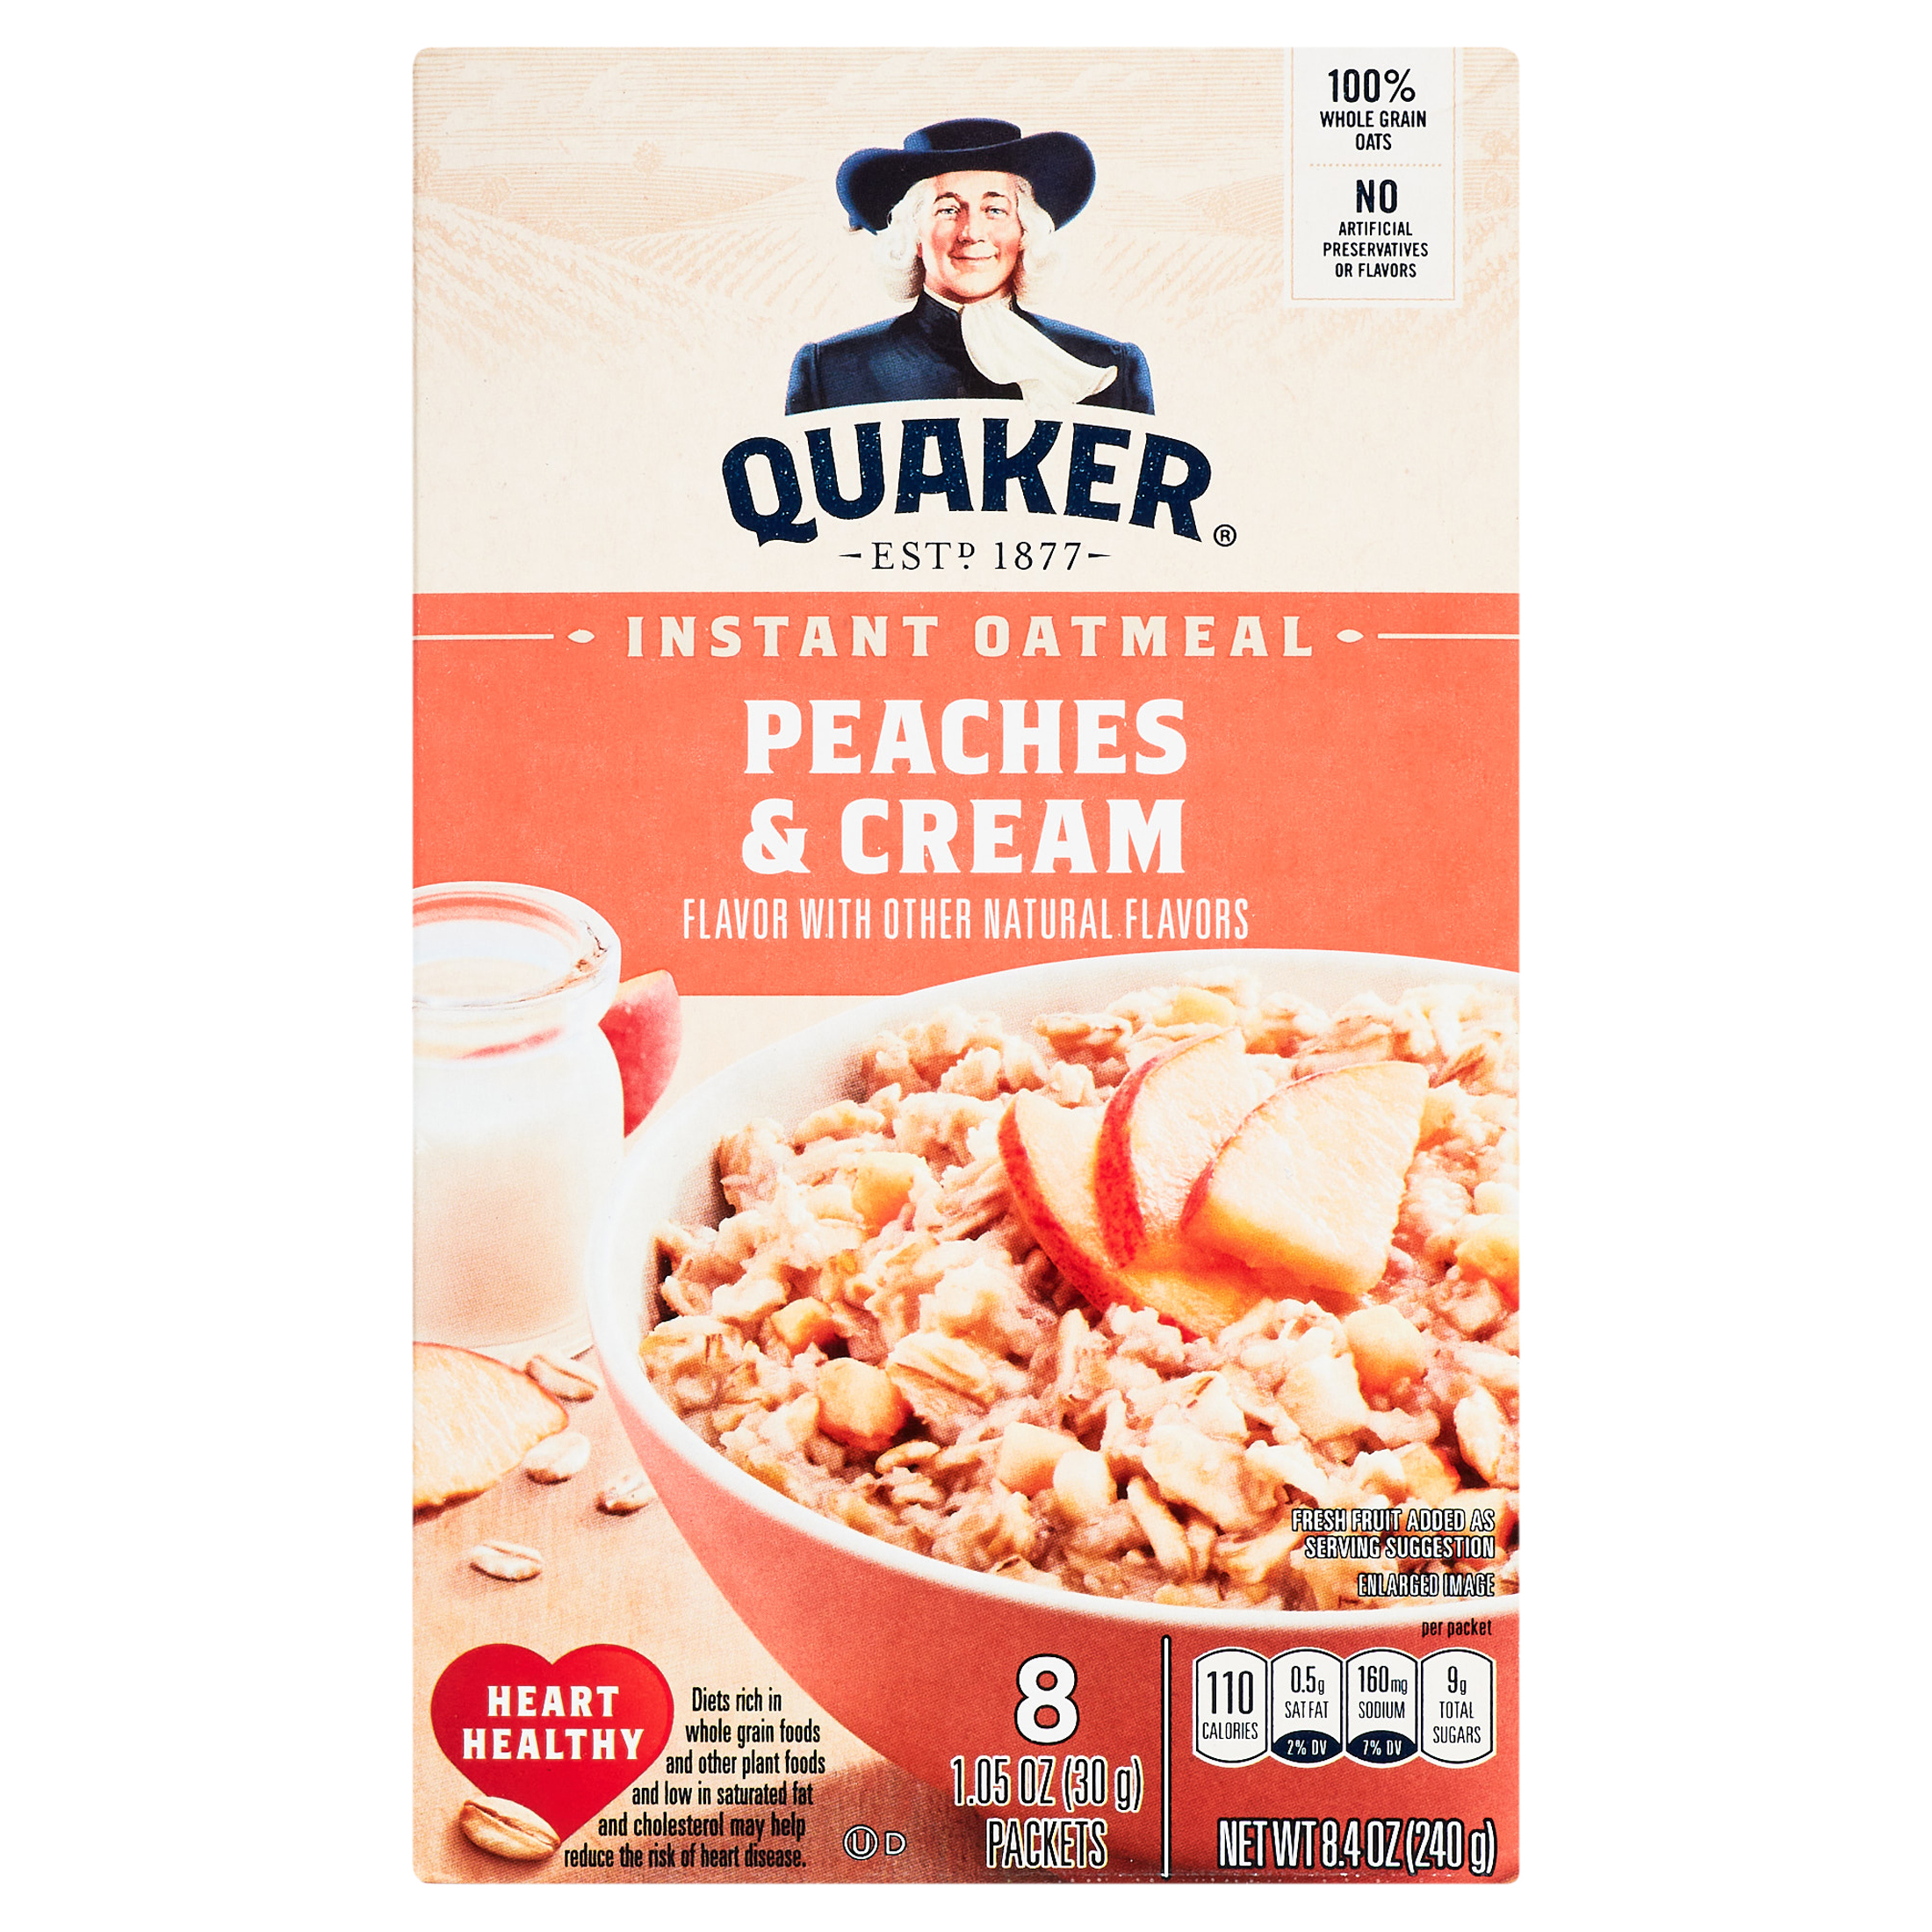 Quaker Instant Oatmeal, Peaches & Cream, 1.05 oz, 8 Packets - image 5 of 14